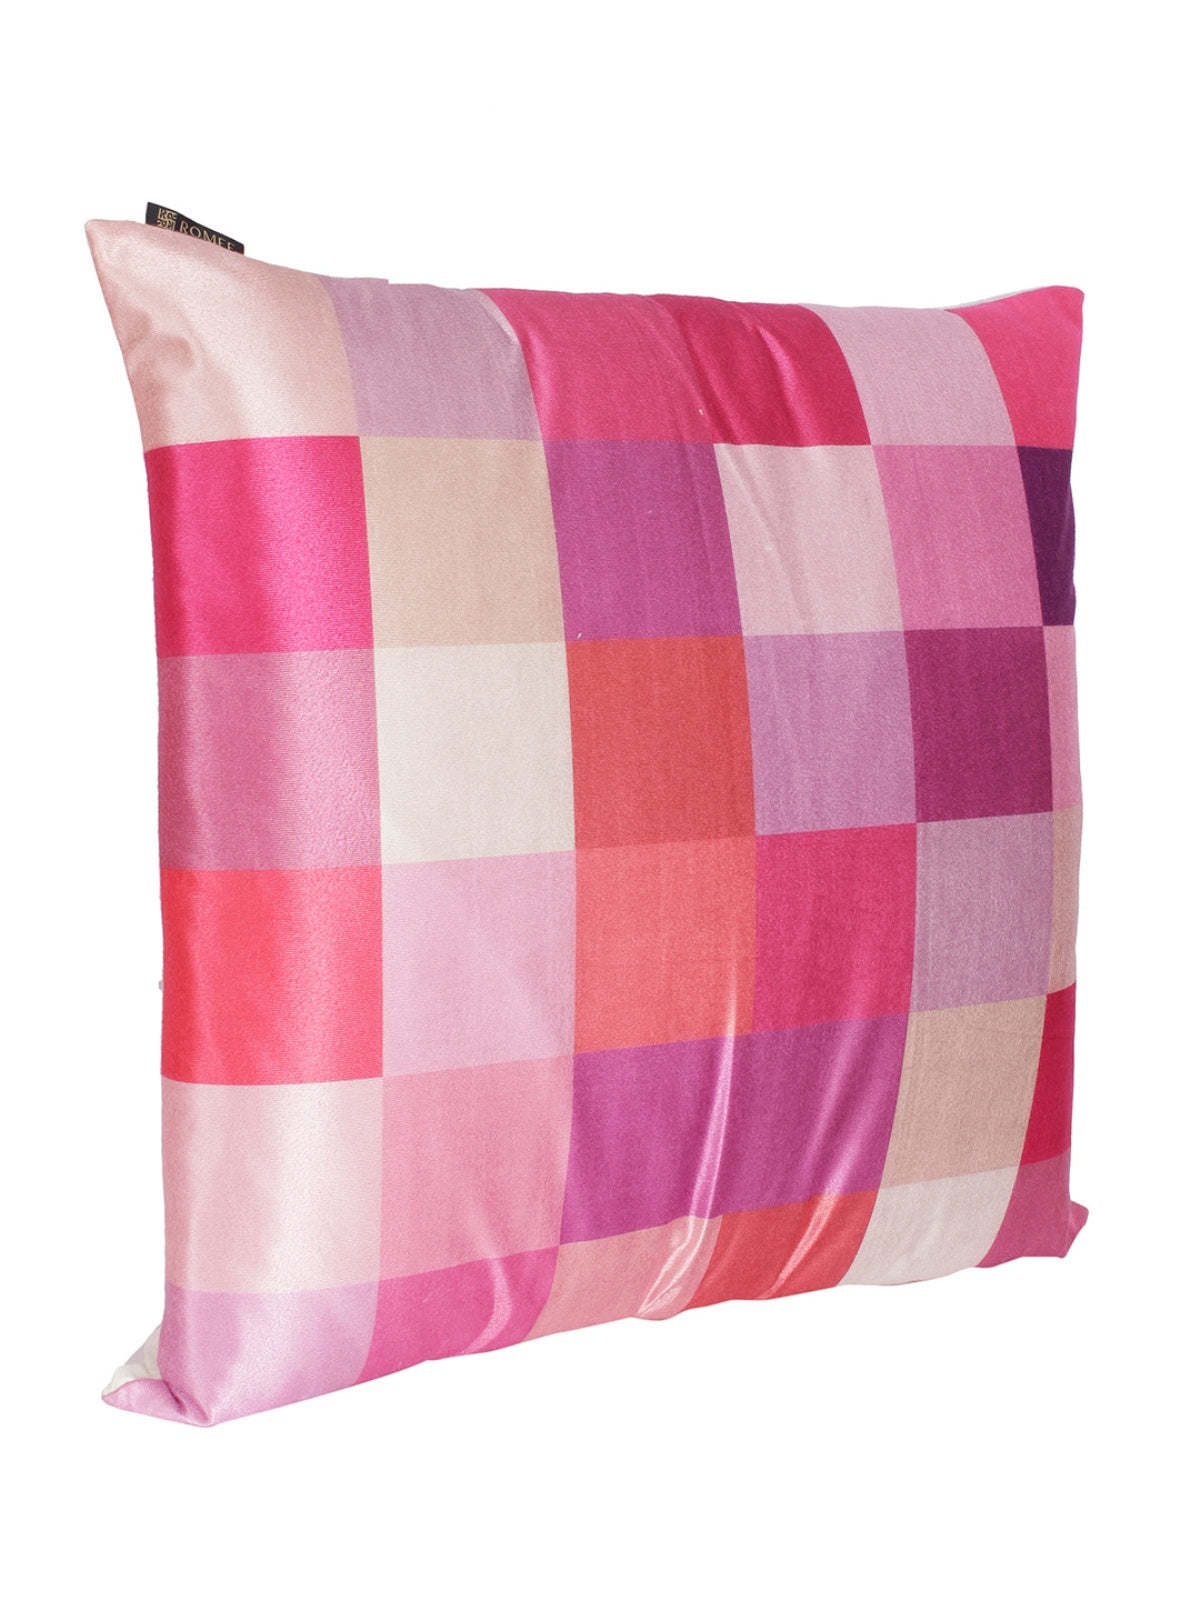 Pink and Red Set of 2 Cushion Covers 24x24 Inch